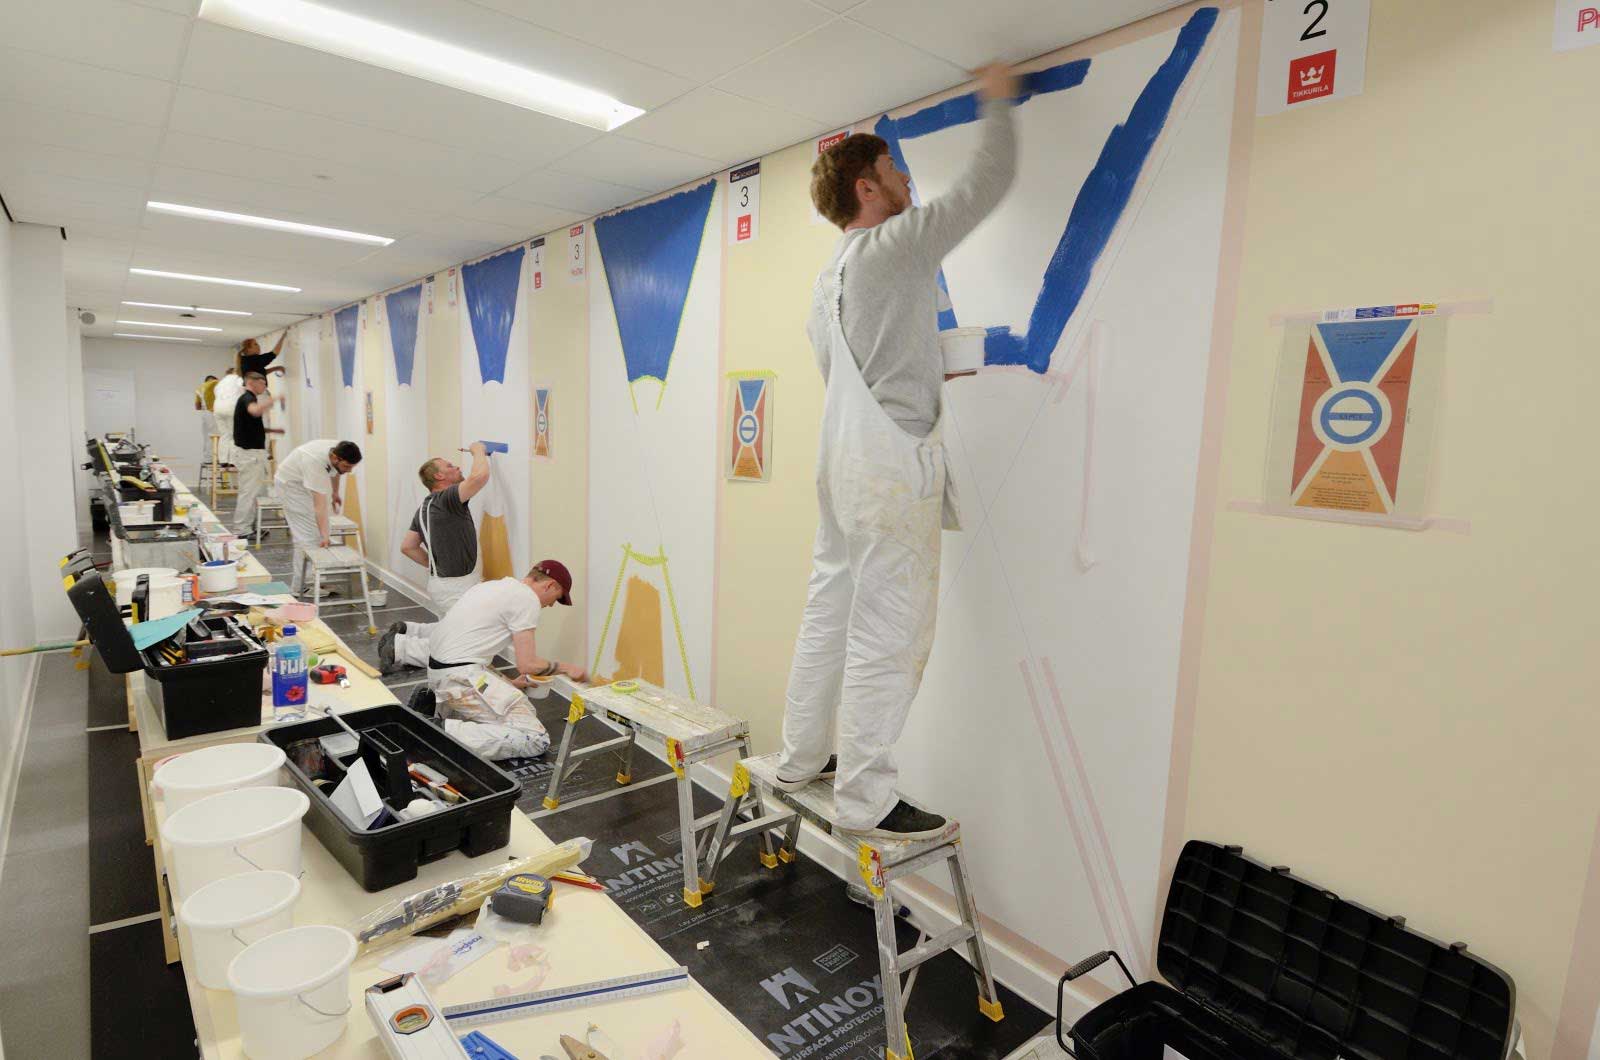 Painting and decorating students at Inverness College UHI